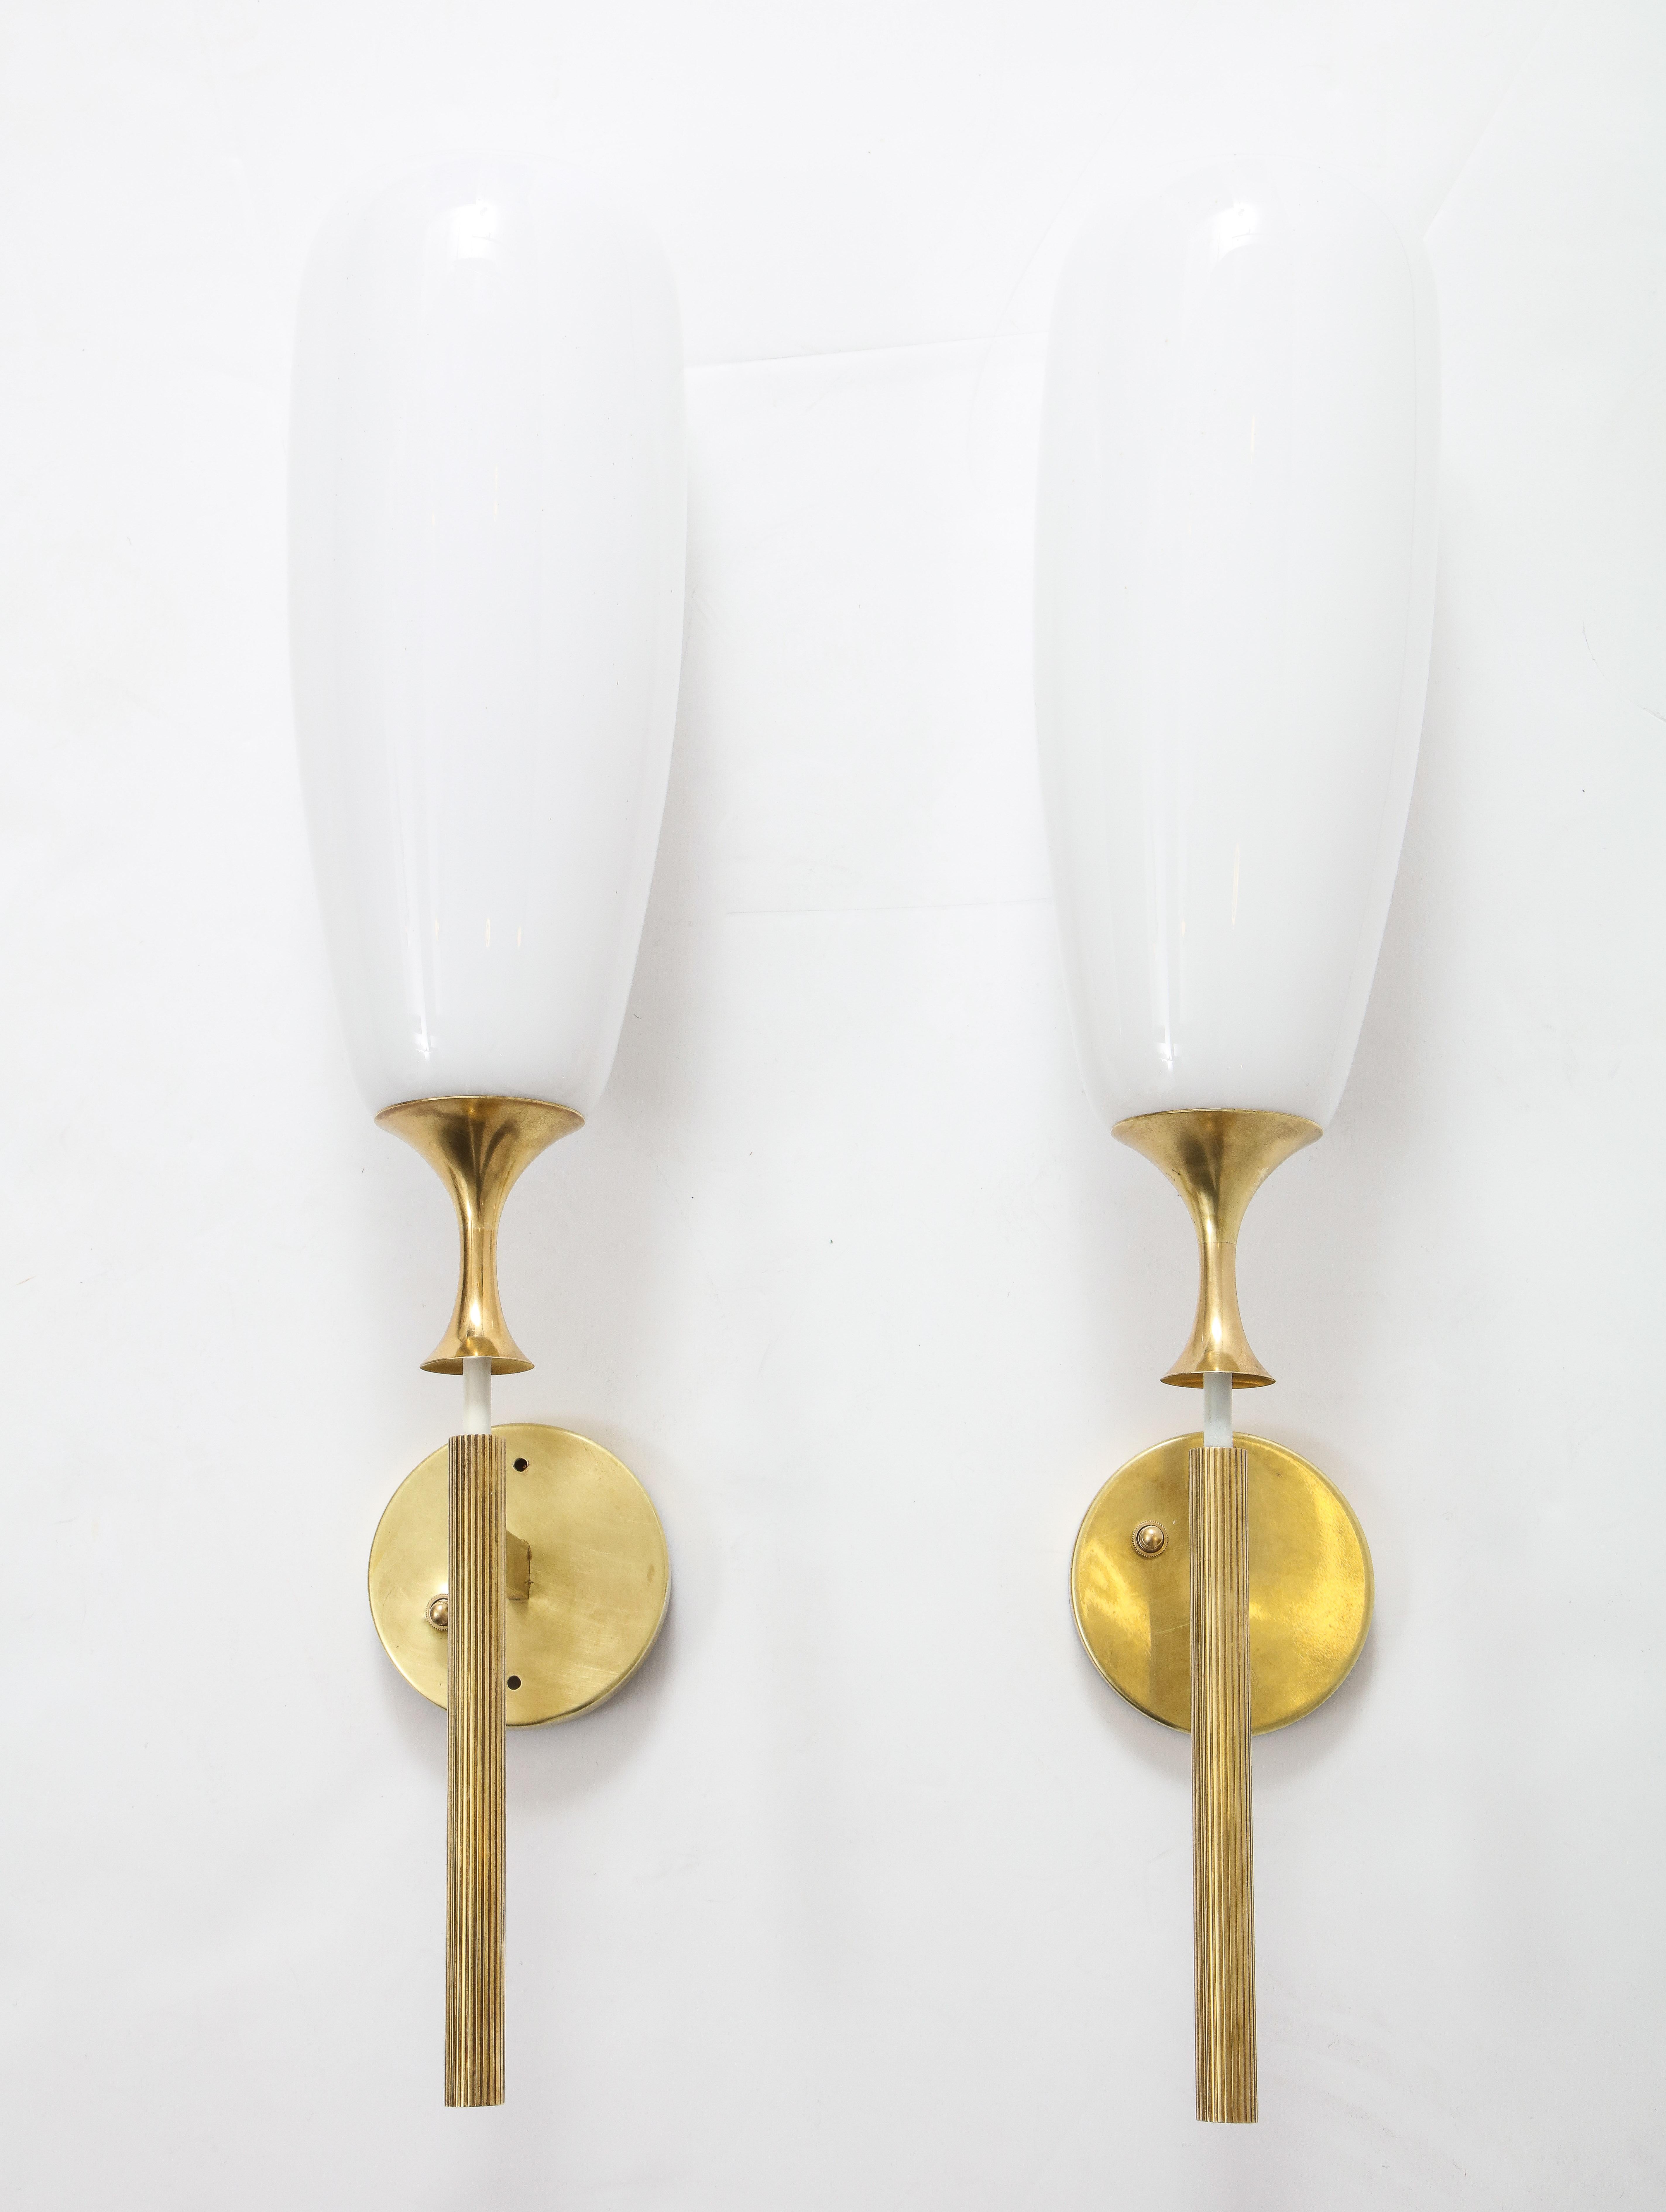 Stunning pair of large 1950s Angelo Lelii designed for Arredoluce brass and glass wall sconces, newly rewired and lightly refinished with beautiful patina to the brass.